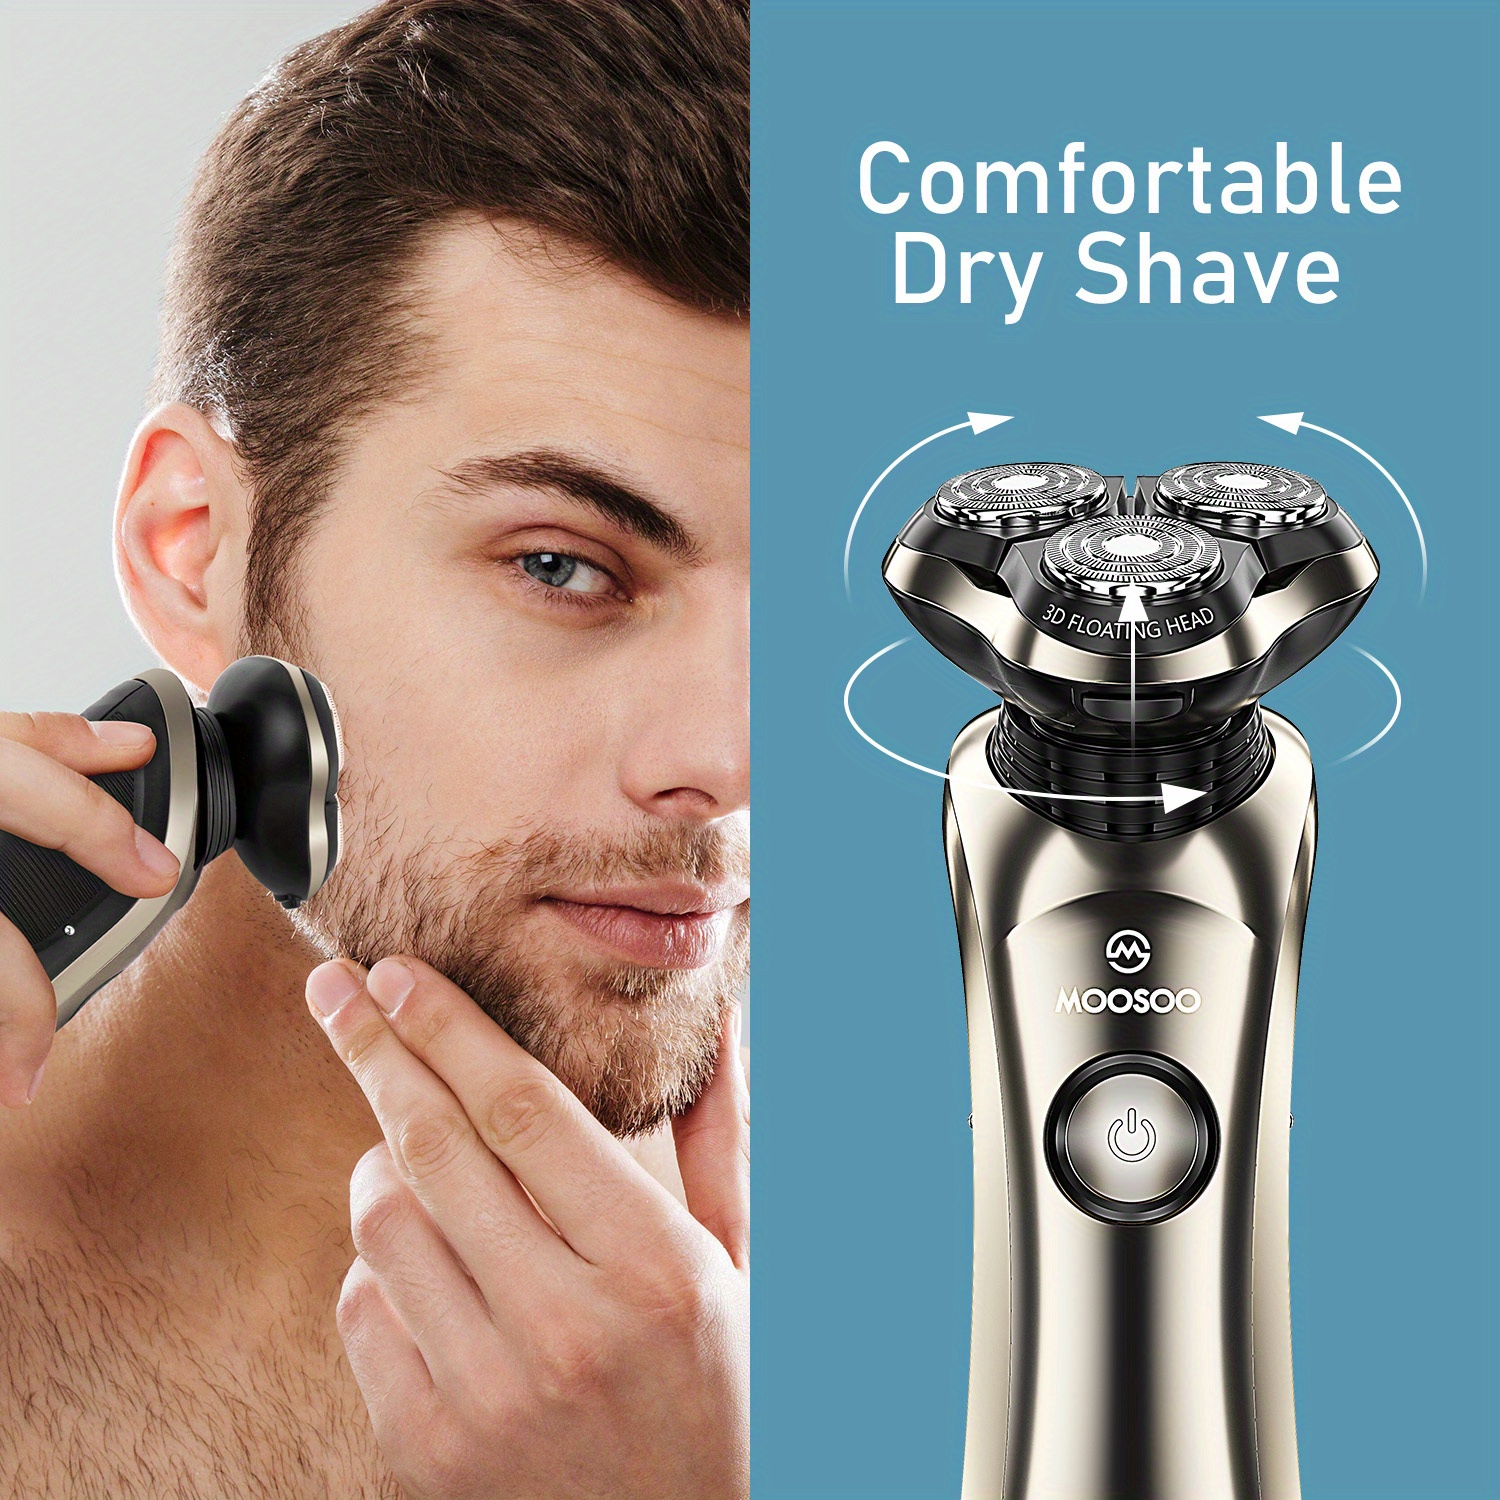 moosoo electric shaver for men wet dry mens electric razor with clean charge station precision trimmer 5 mins fast charging technology lcd display perfect gifts for men dad